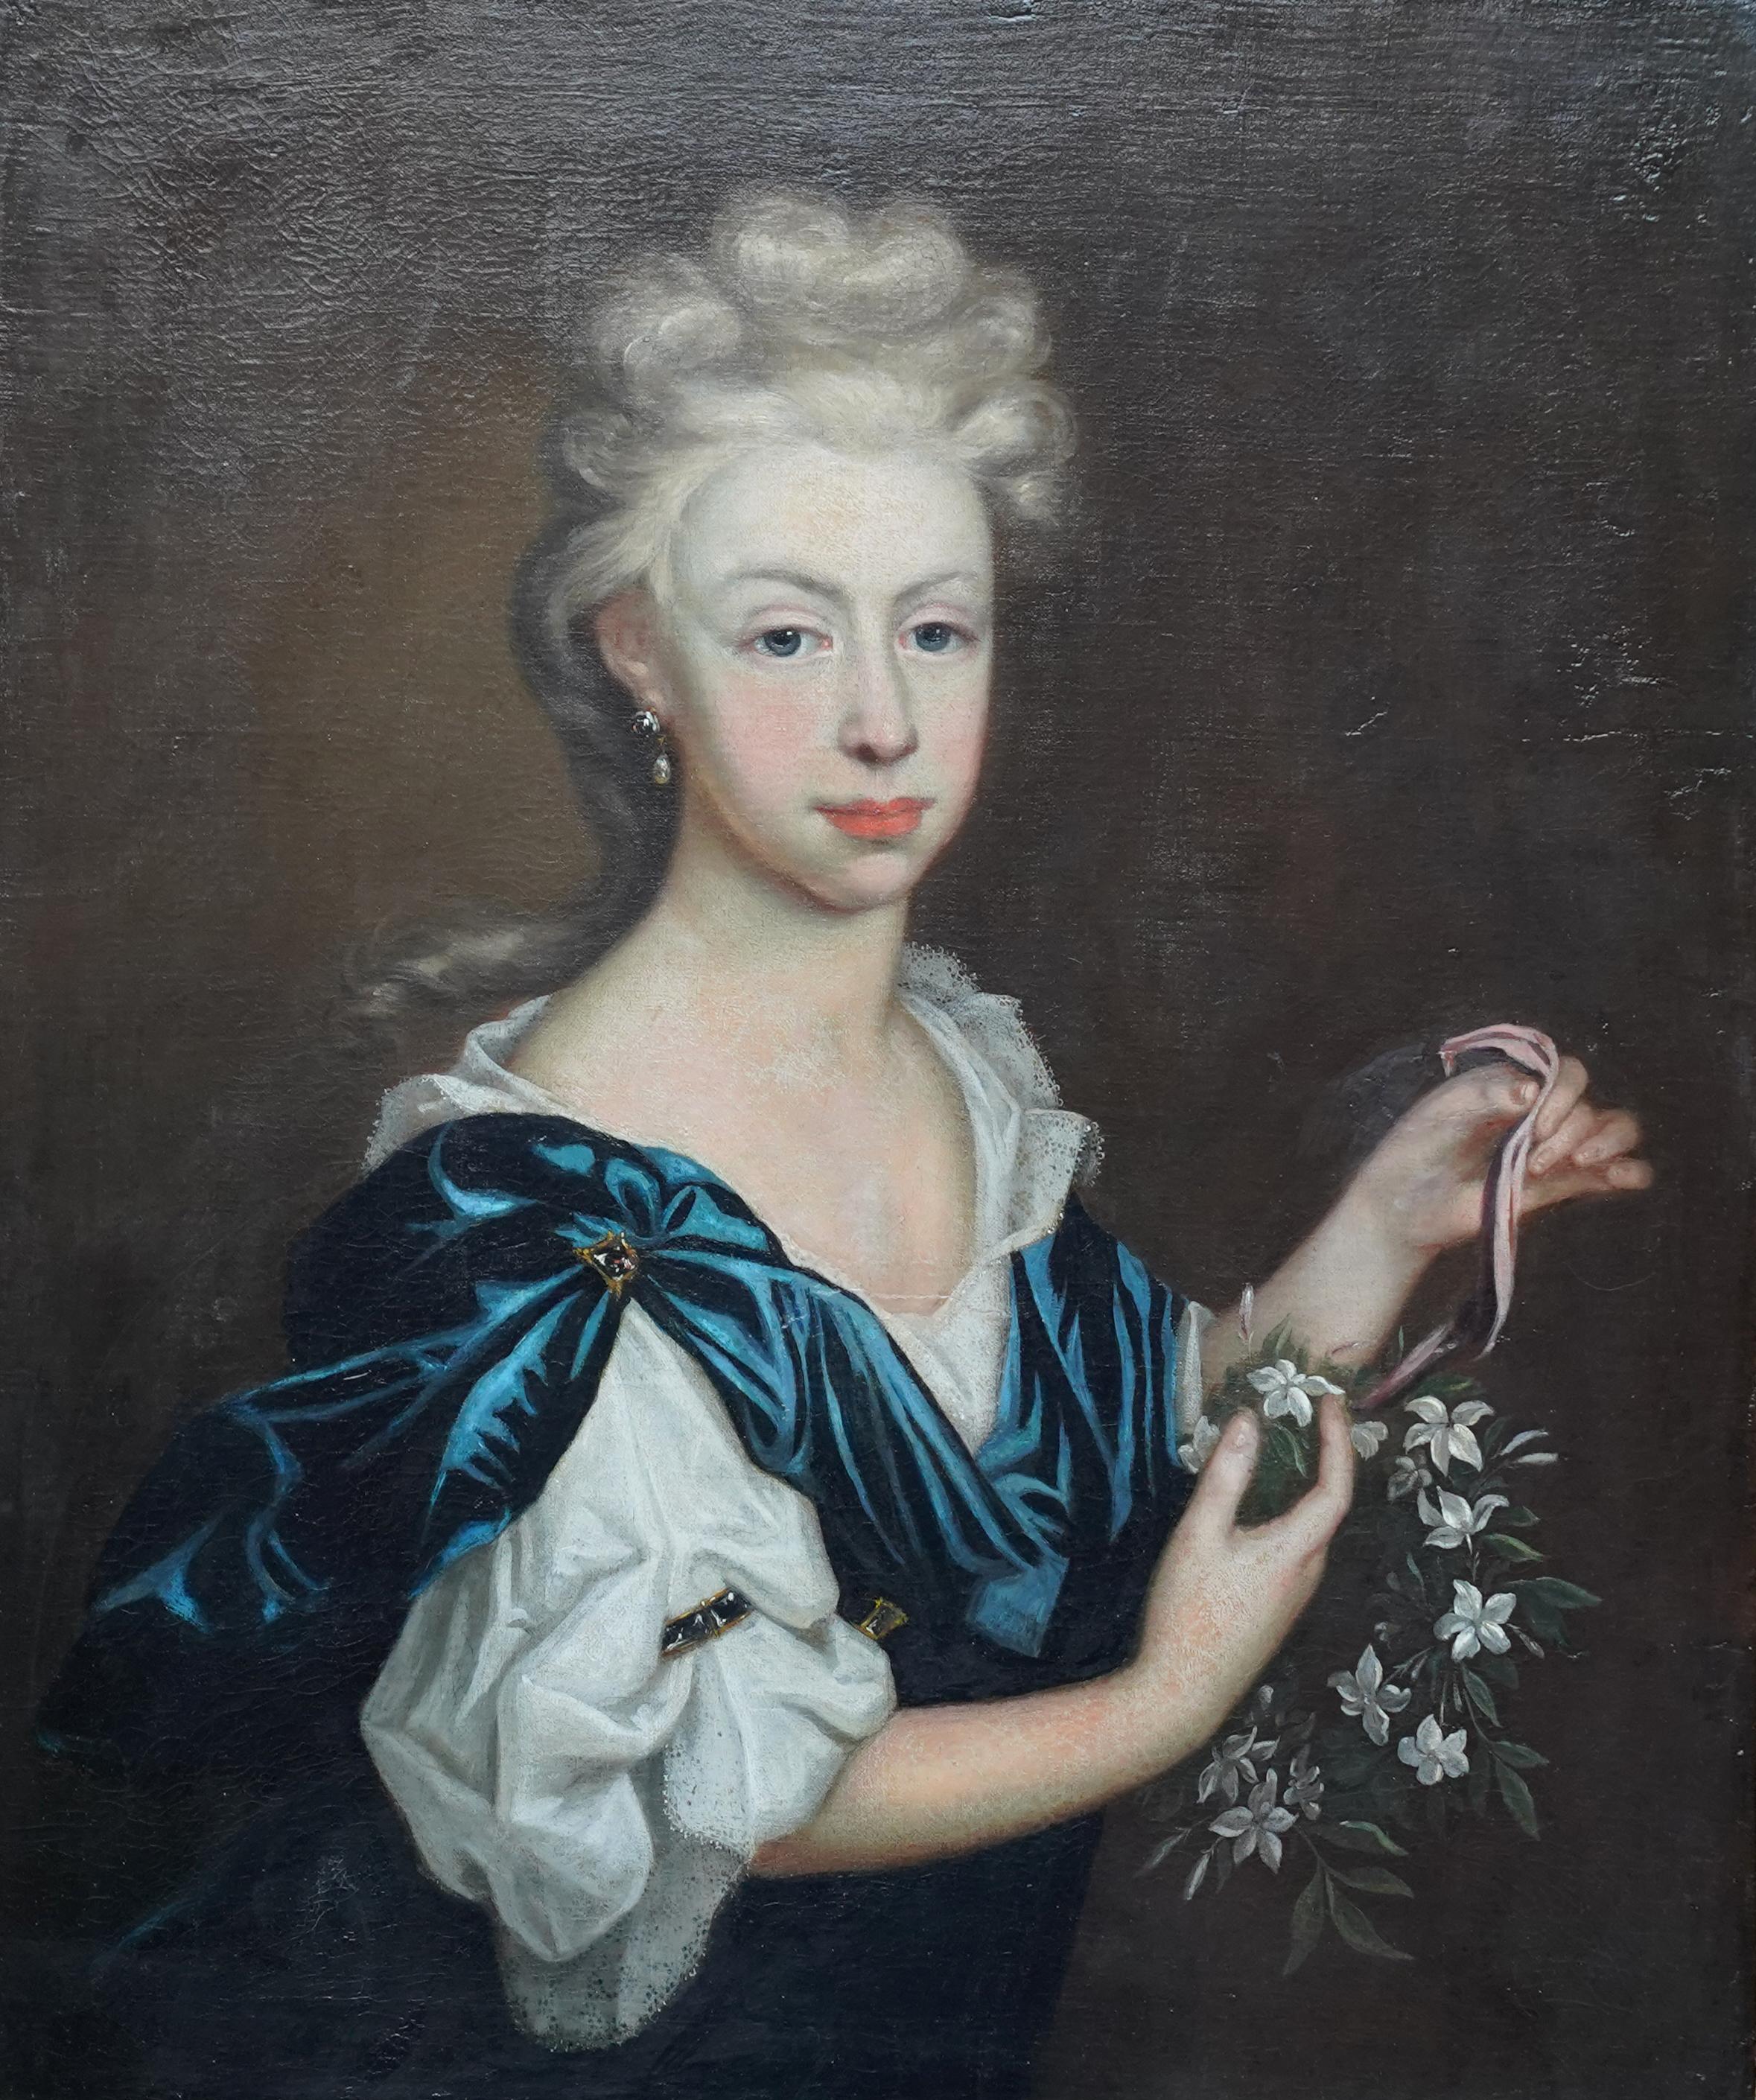 Portrait of Lady with Garland of Flowers - British 17thC Old Master oil painting - Painting by Michael Dahl